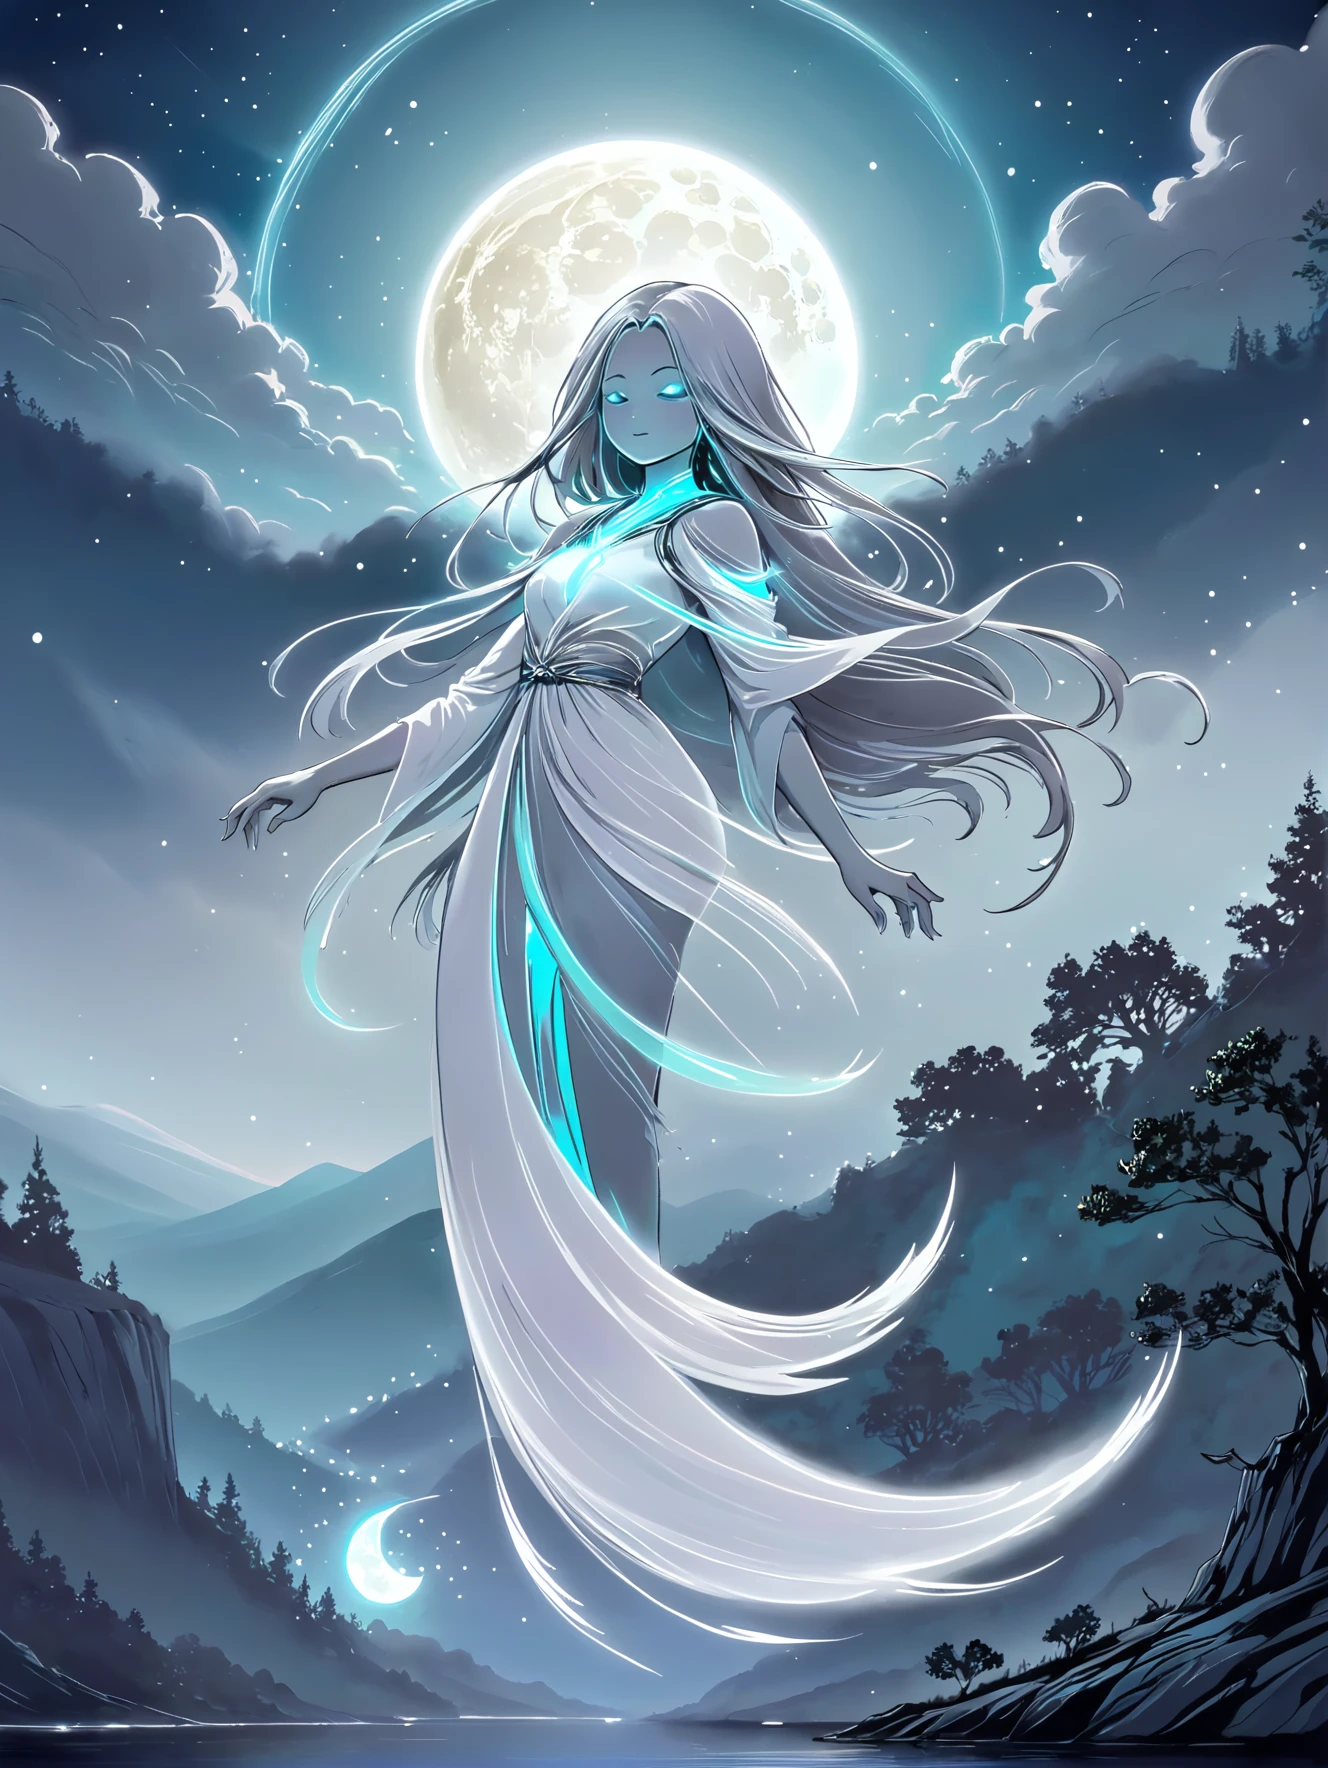 A luminous moon spirit, with silvery trails, hovering over a tranquil night landscape.